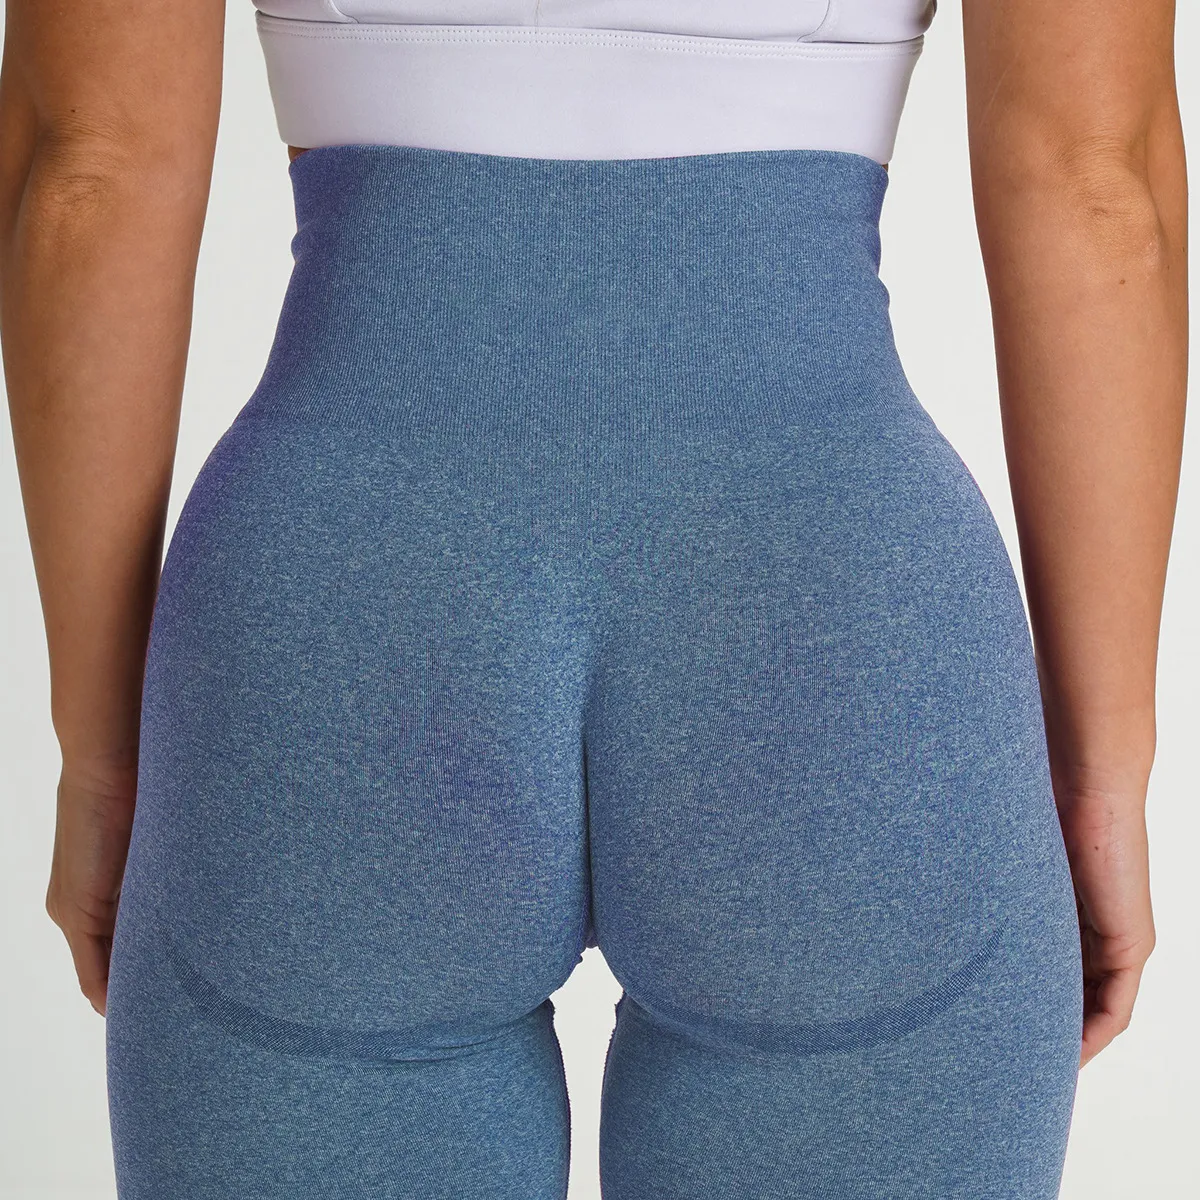 High Waist Seamless Assless Yoga Pants With Hips For Women Push Up,  Stretchy, And Athletic Fitness Leggings For Running, Training, Gym,  Lifting, Sports, Cycling, Or Activewear From Aaa99901, $14.7